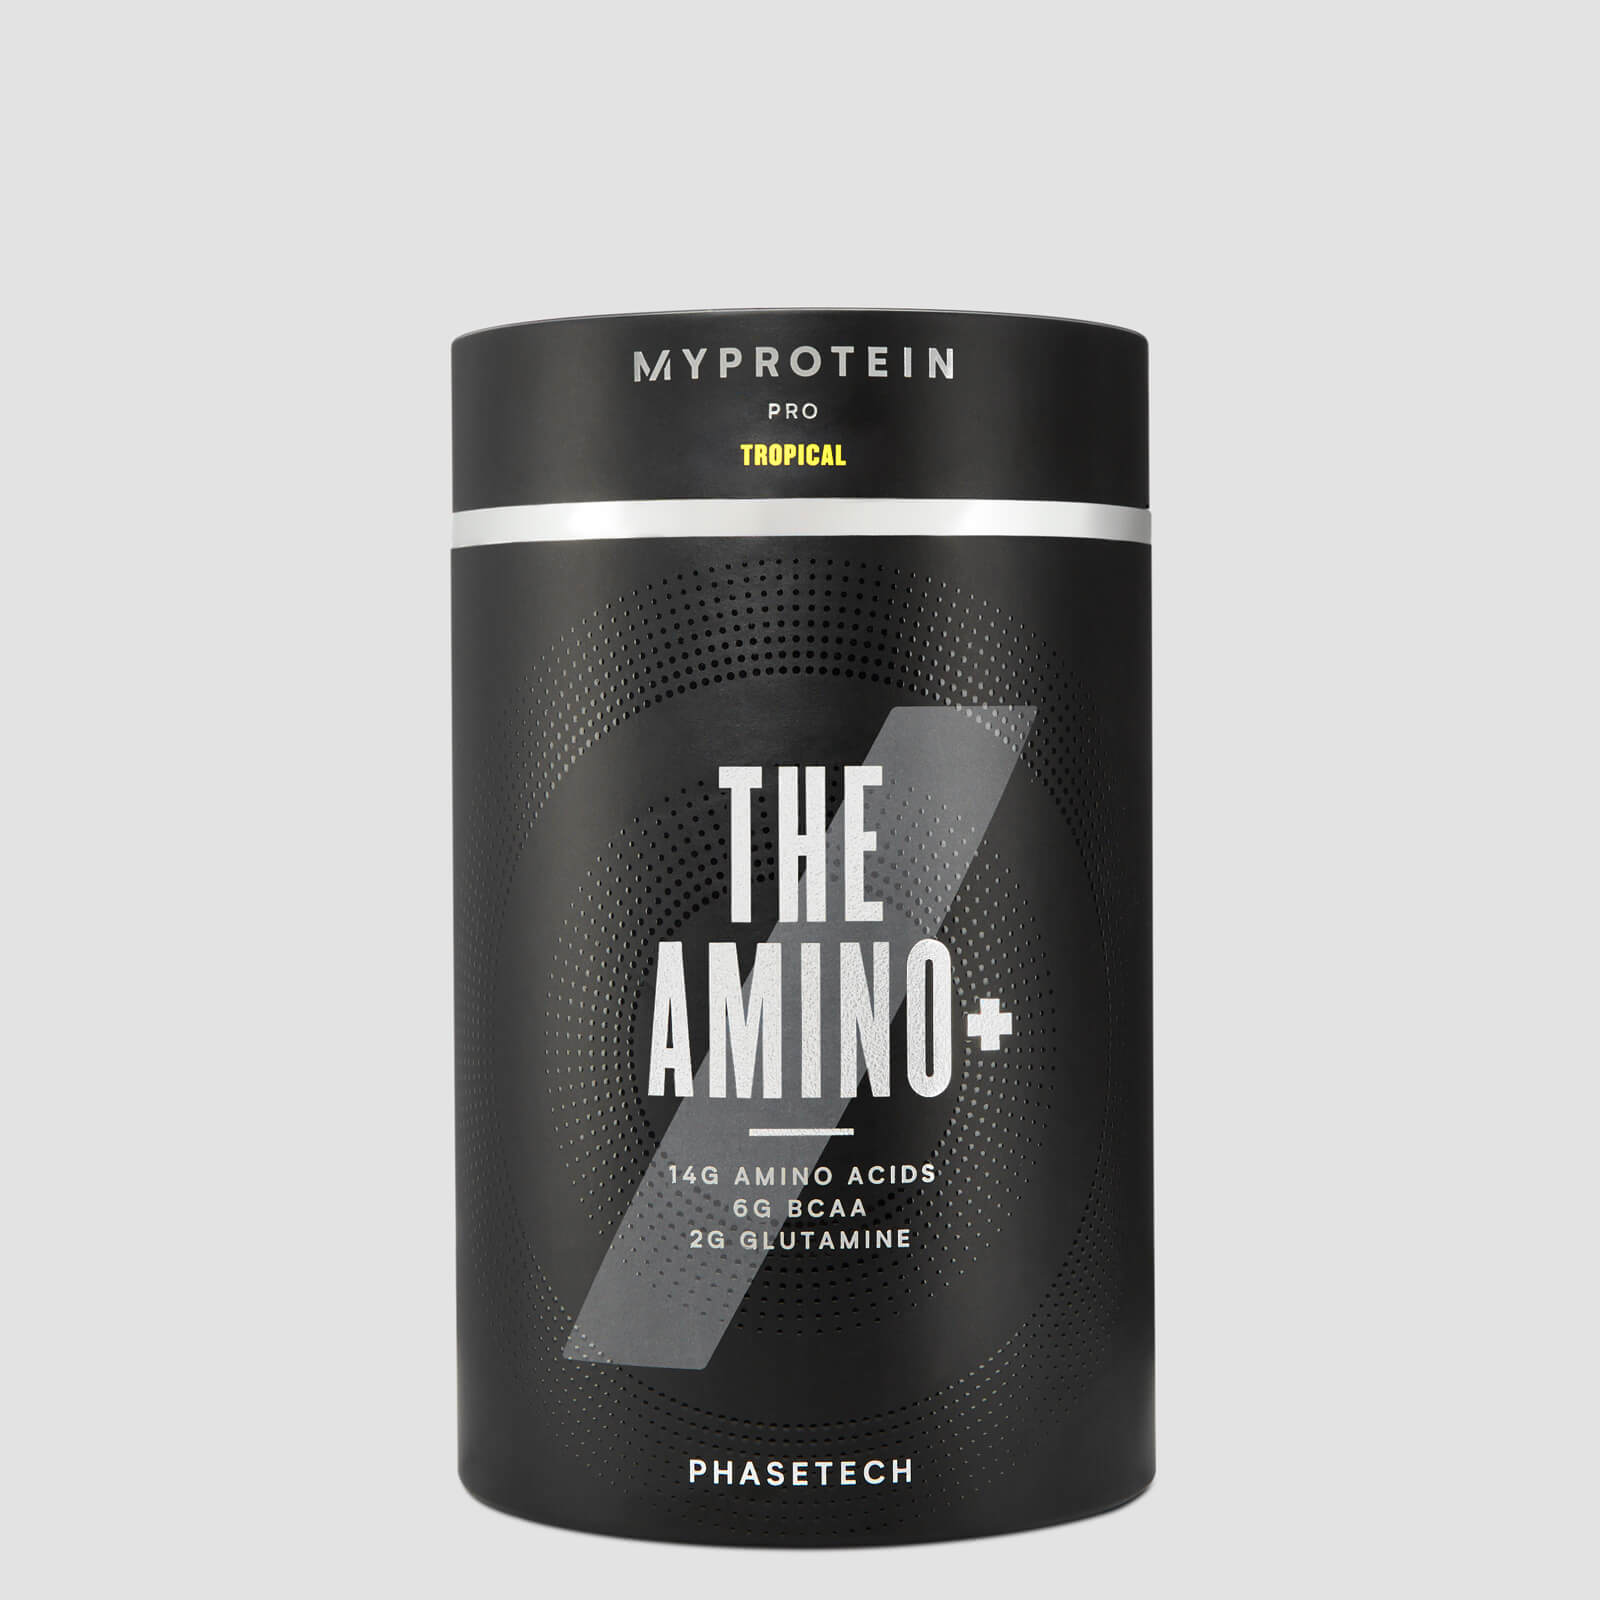 Myprotein THE Amino+ - 20servings - Tropisk